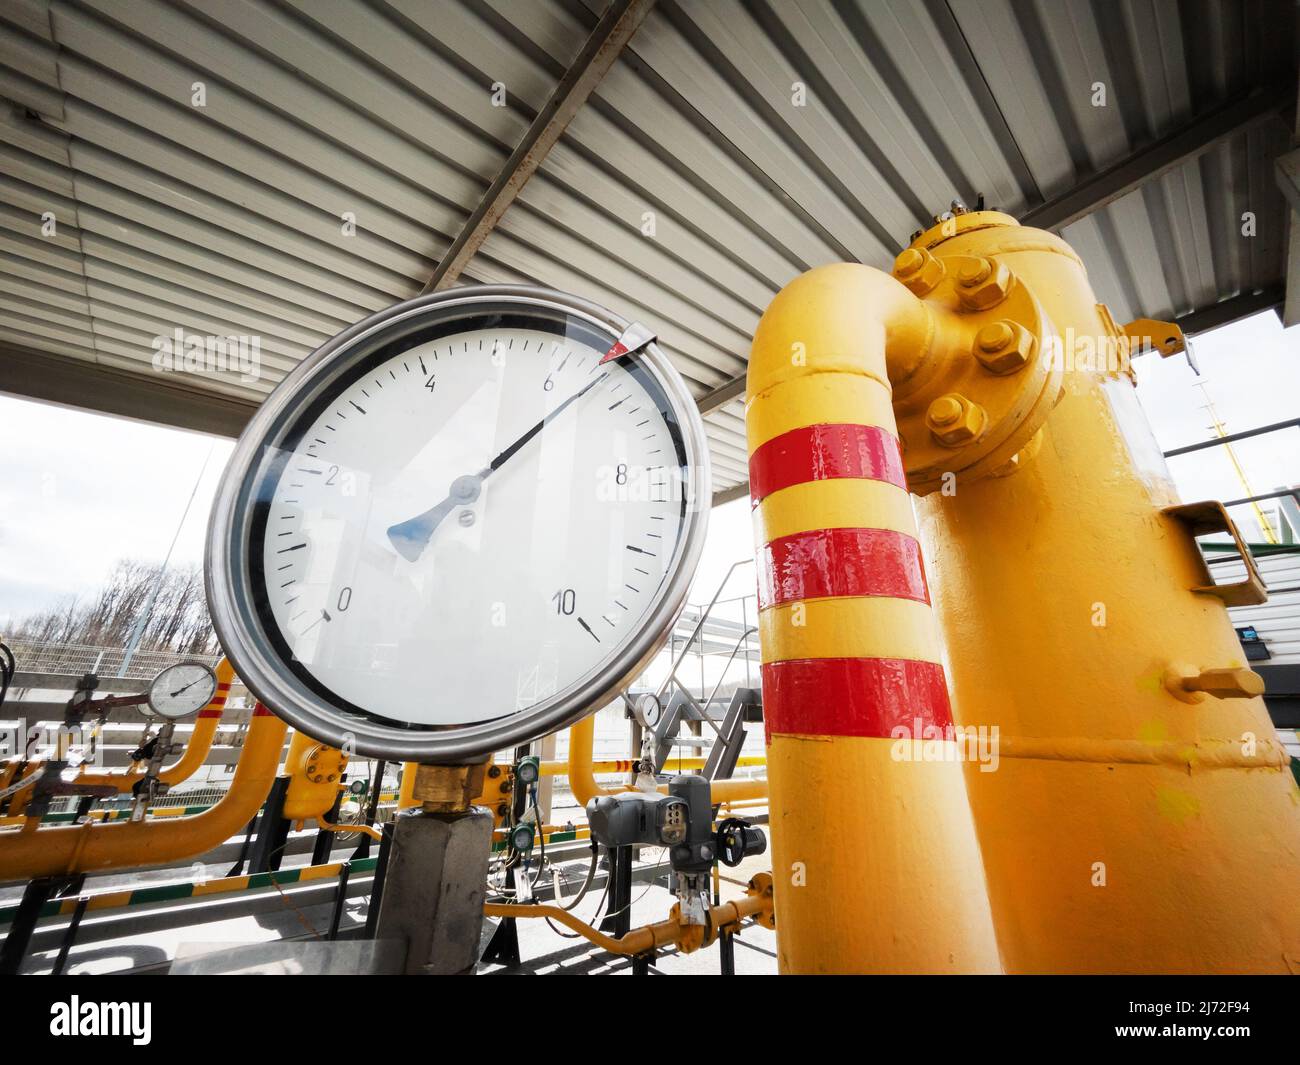 Yellow gas pipeline with a large pressure gauge for measuring gas pressure to generate energy Stock Photo